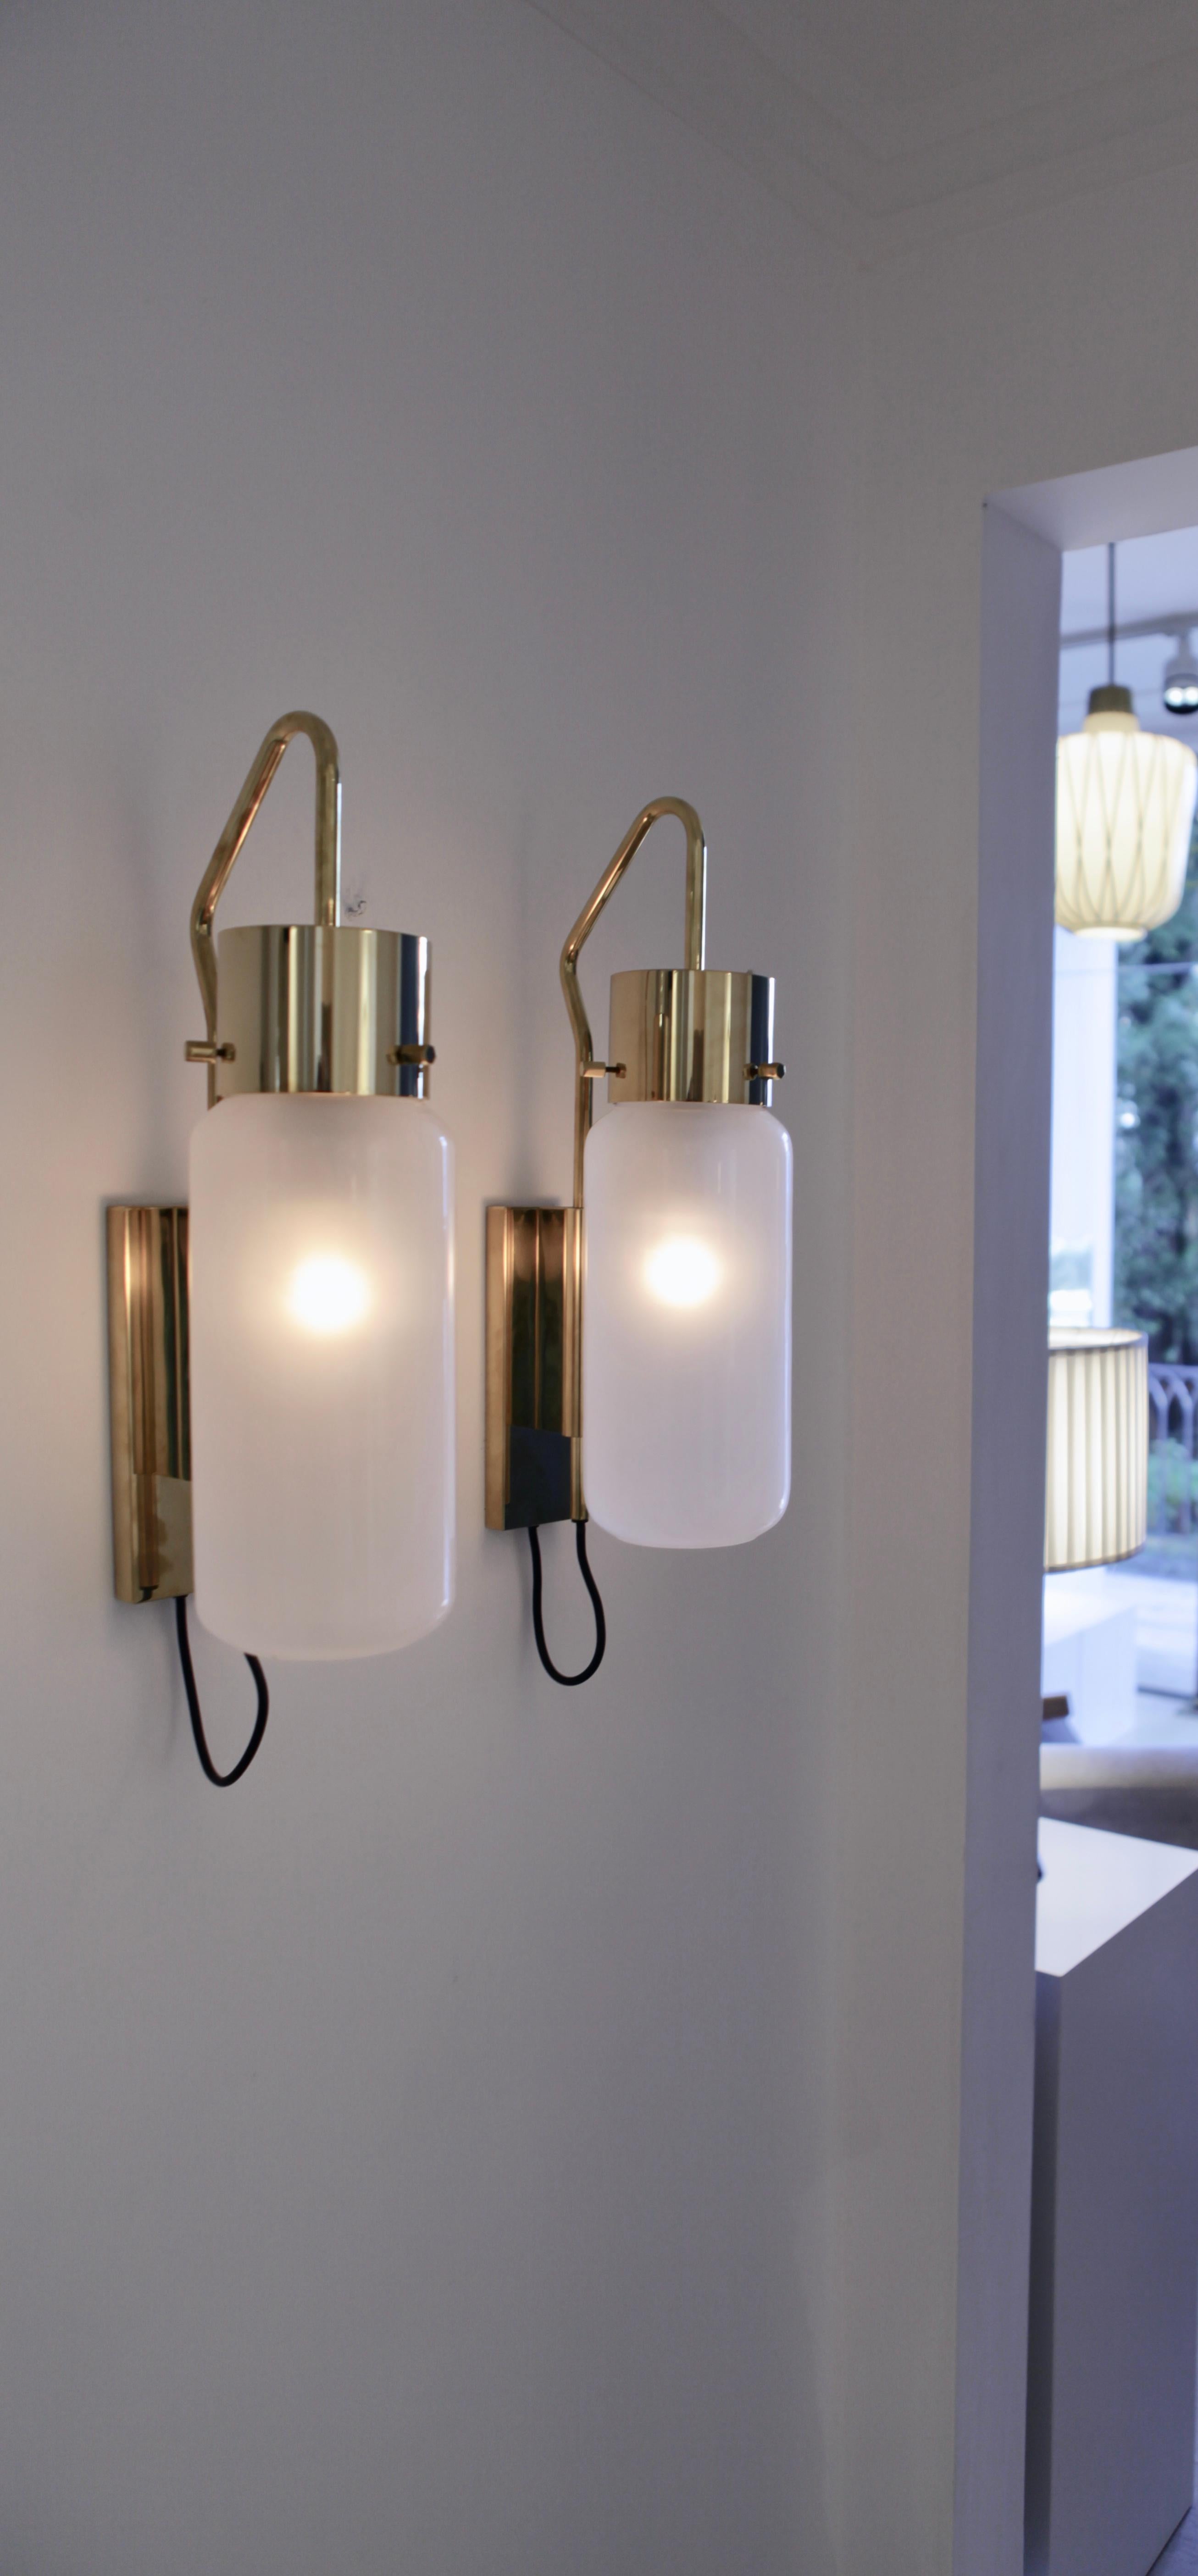 Luigi Caccia Dominioni,
A pair of Bidone Sconces LP 10, brass and opaline glass, adjustable height.
Italy, 1958.
Edition Azucena.
Excellent condition.